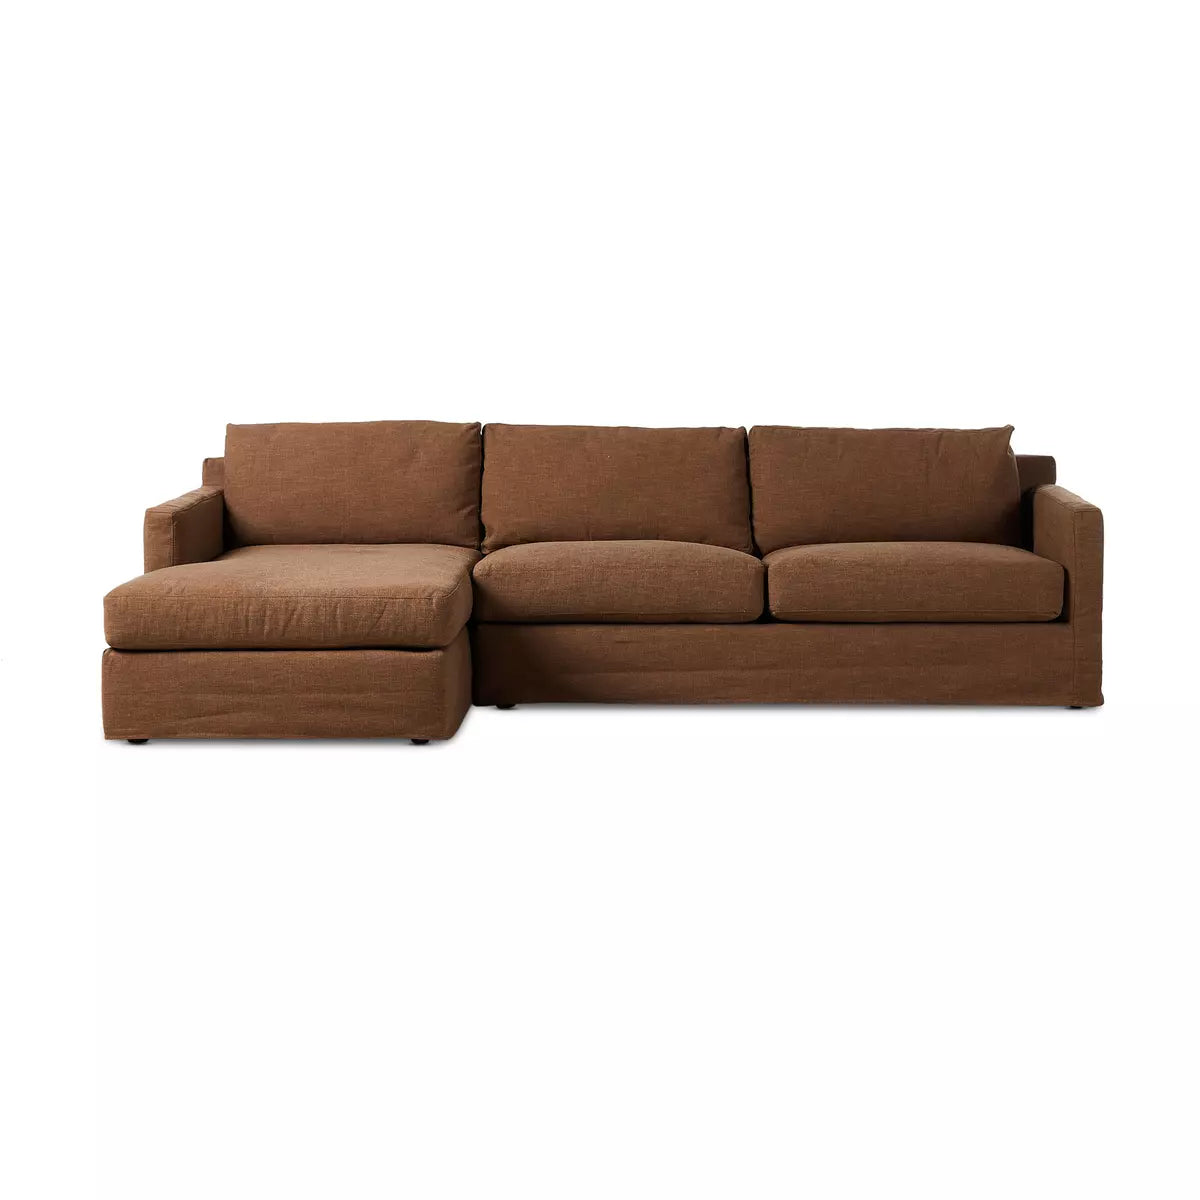 Hampton 2-Piece Slipcover Sectional Left Chaise Antwerp Cafe